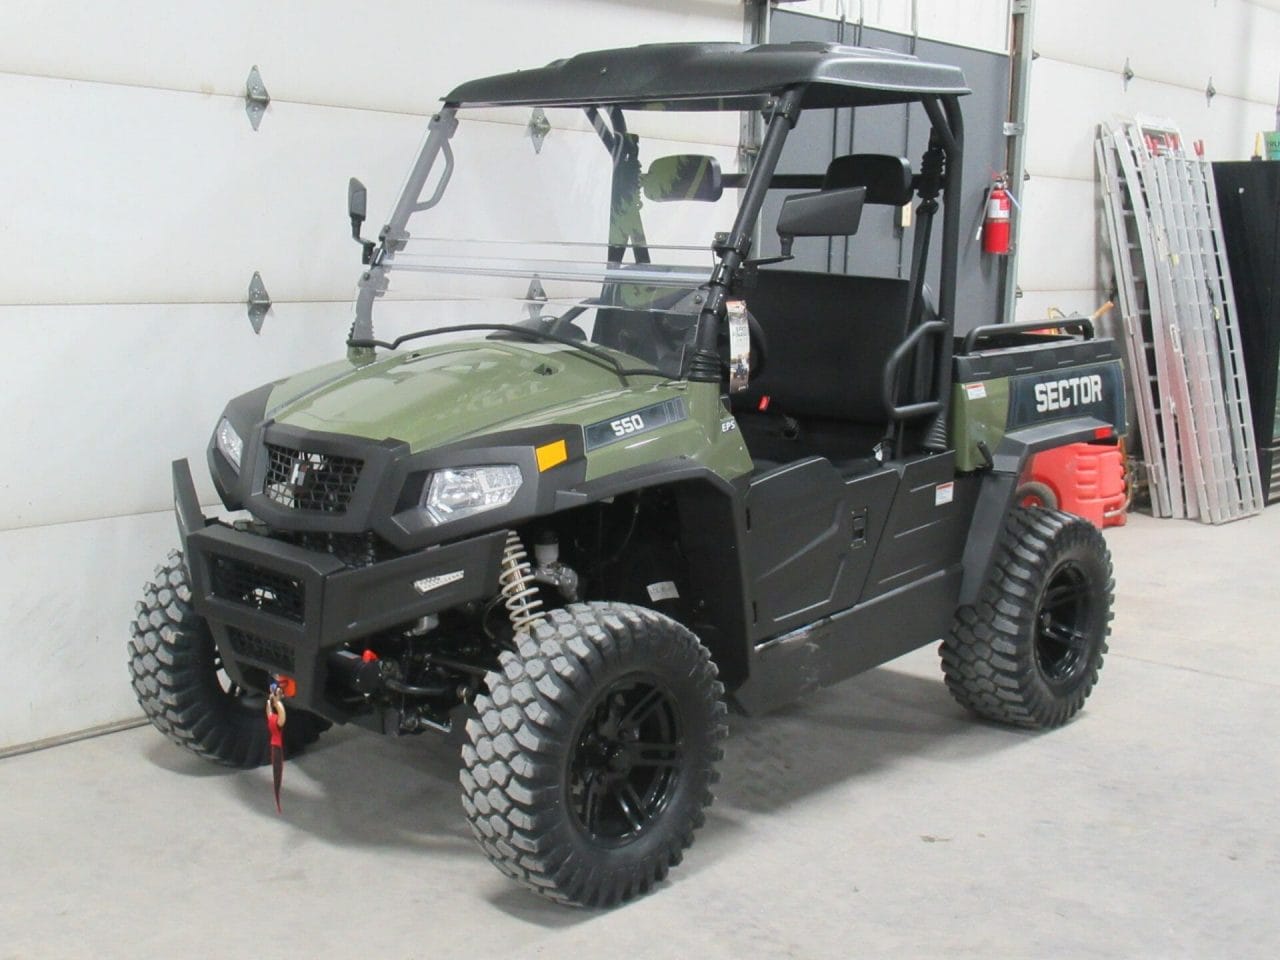 2022 Hisun Sector 550 4×4 EPS. Colors in Stock- Green, Red, and Tan!!!